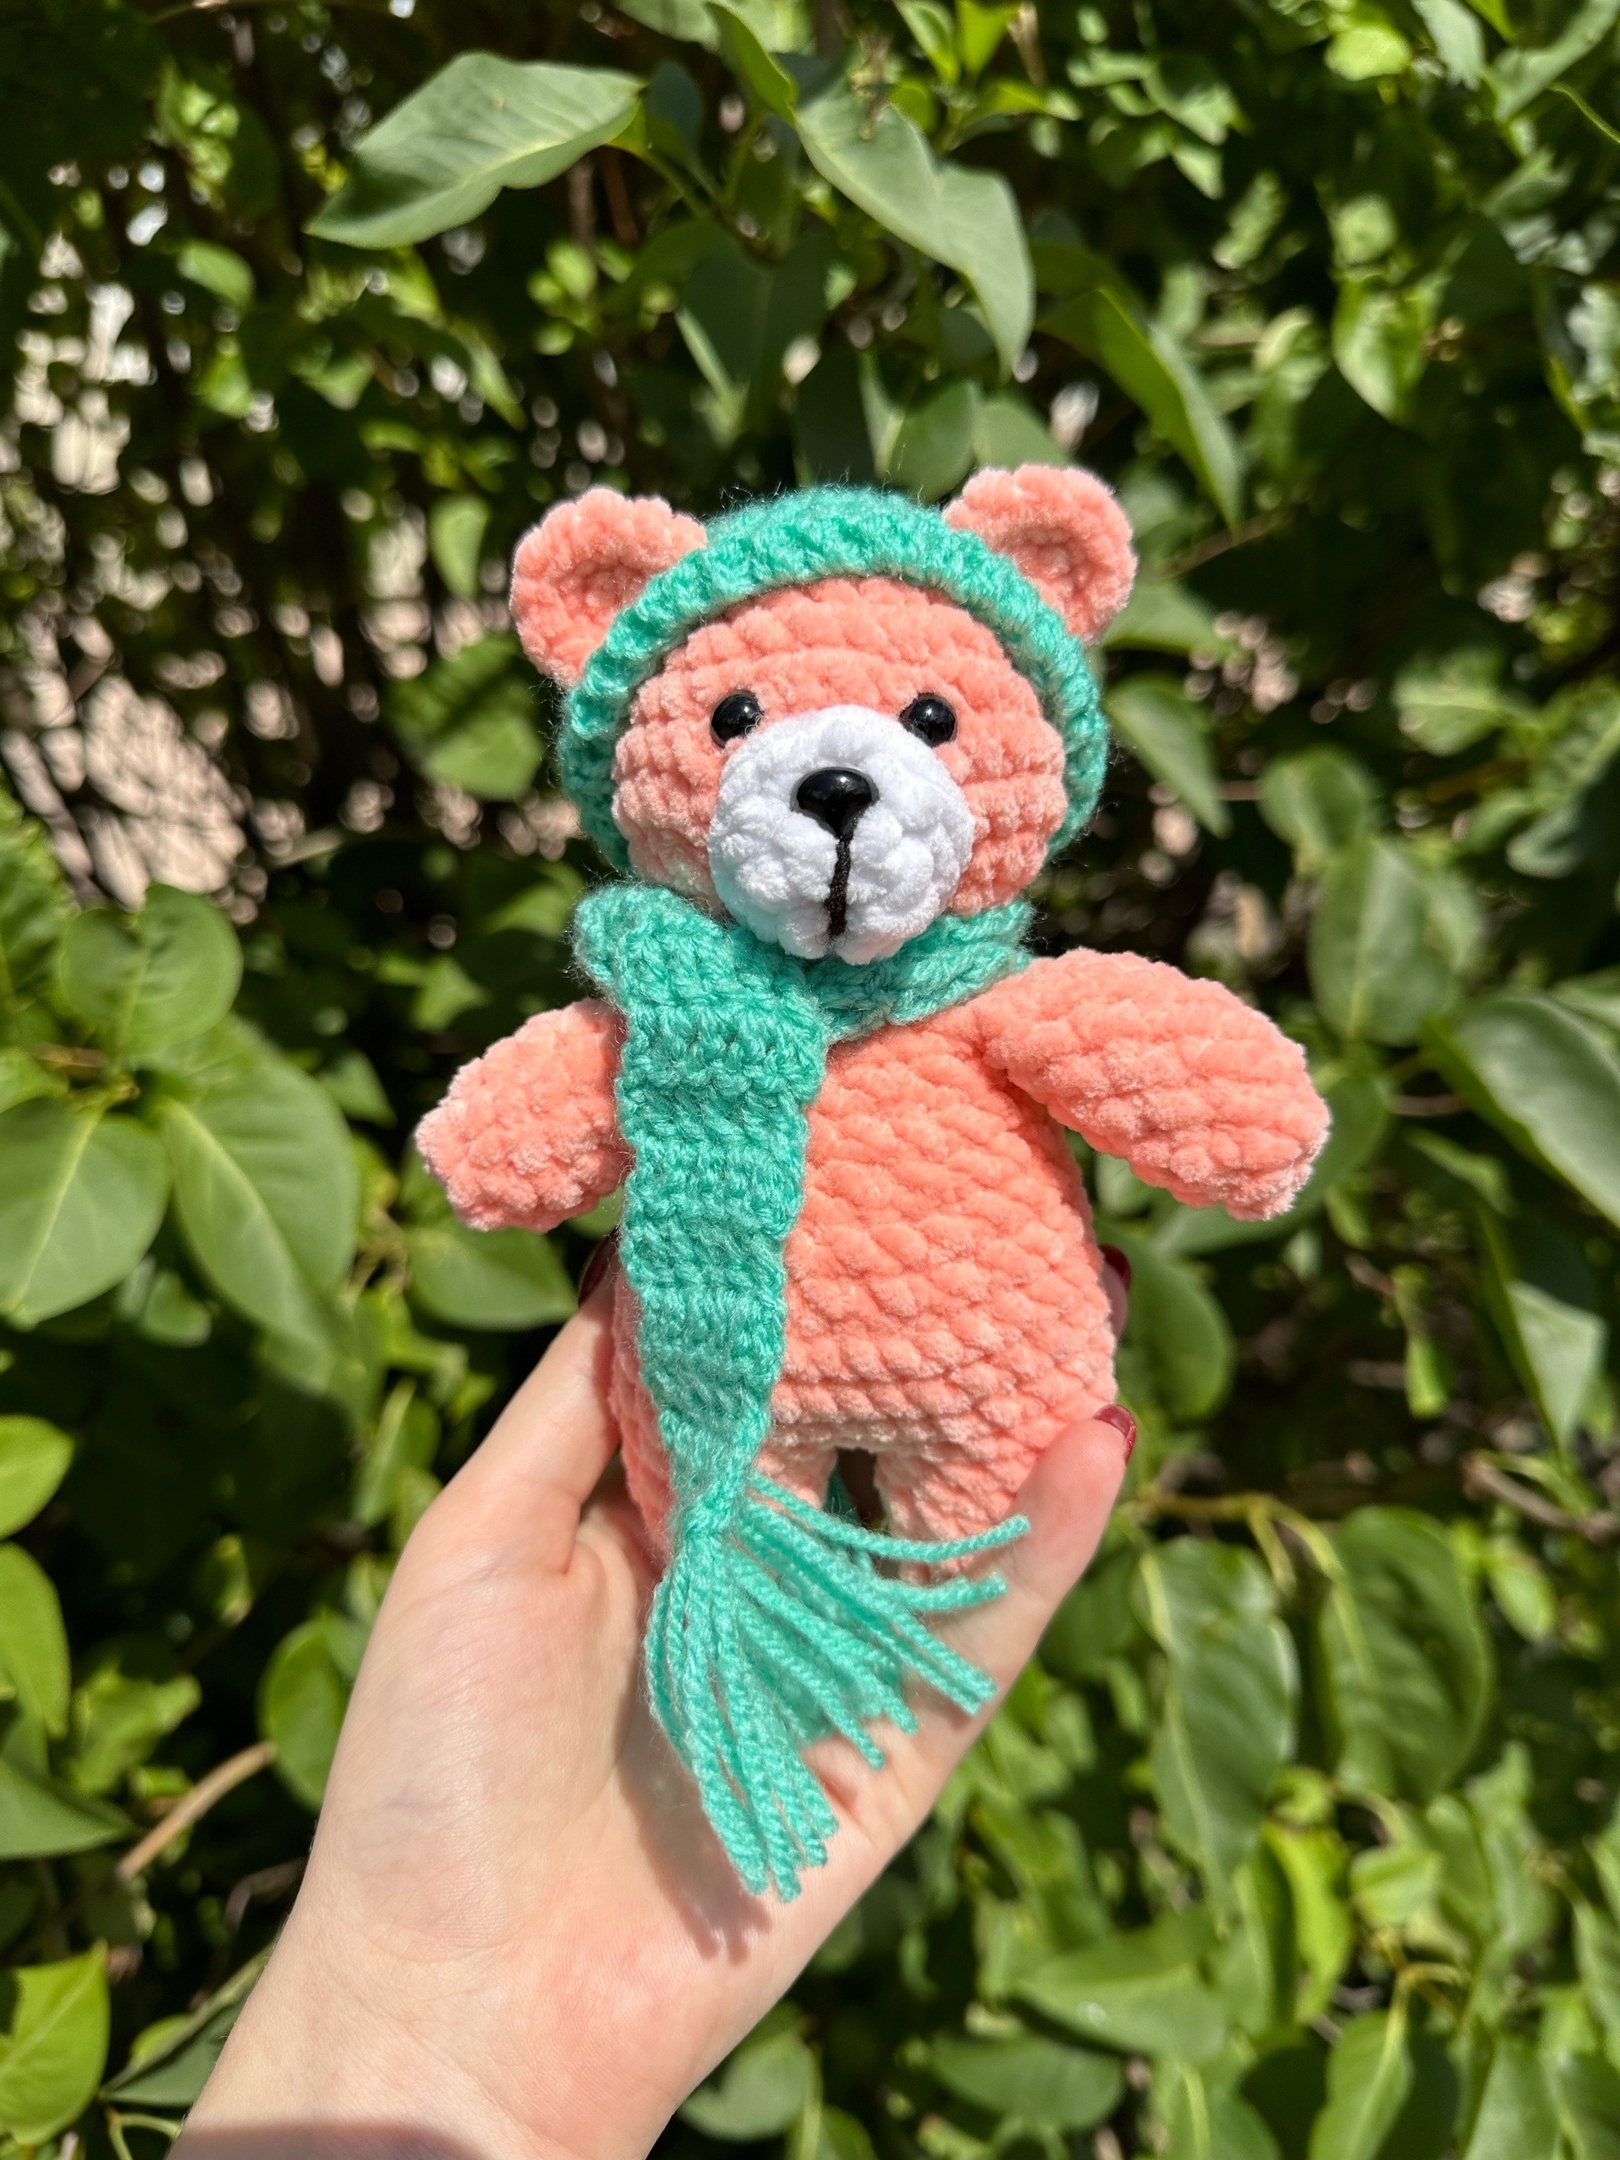 bear - My, Negative, Delivery, Post office, Knitting, Needlework, Needlework without process, Crochet, Amigurumi, With your own hands, The Bears, Author's toy, Plush Toys, Knitted toys, Toys, Longpost